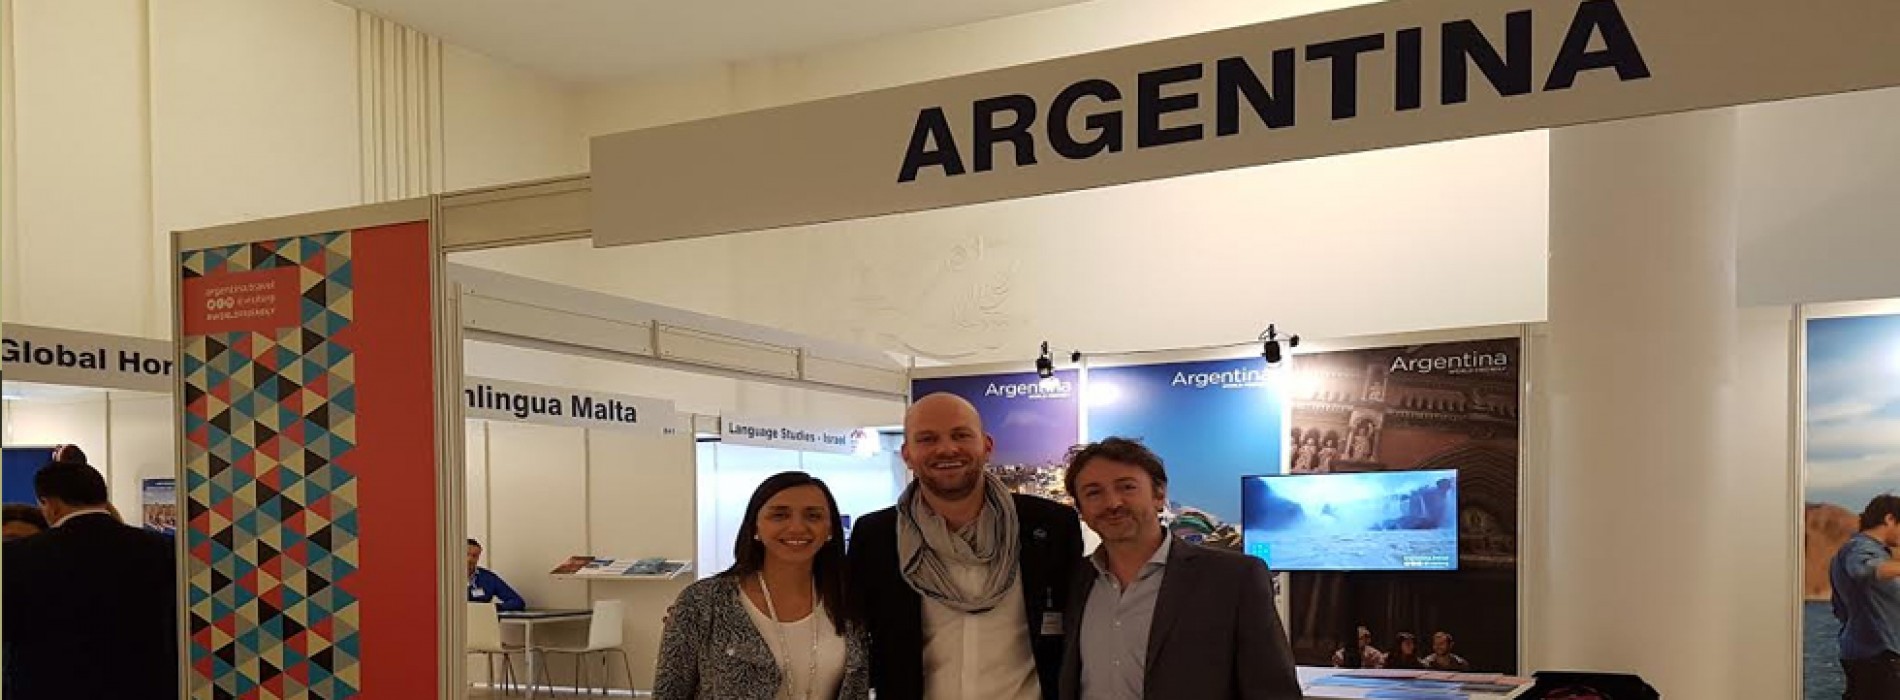 Argentina attended EXPOLINGUA 2016